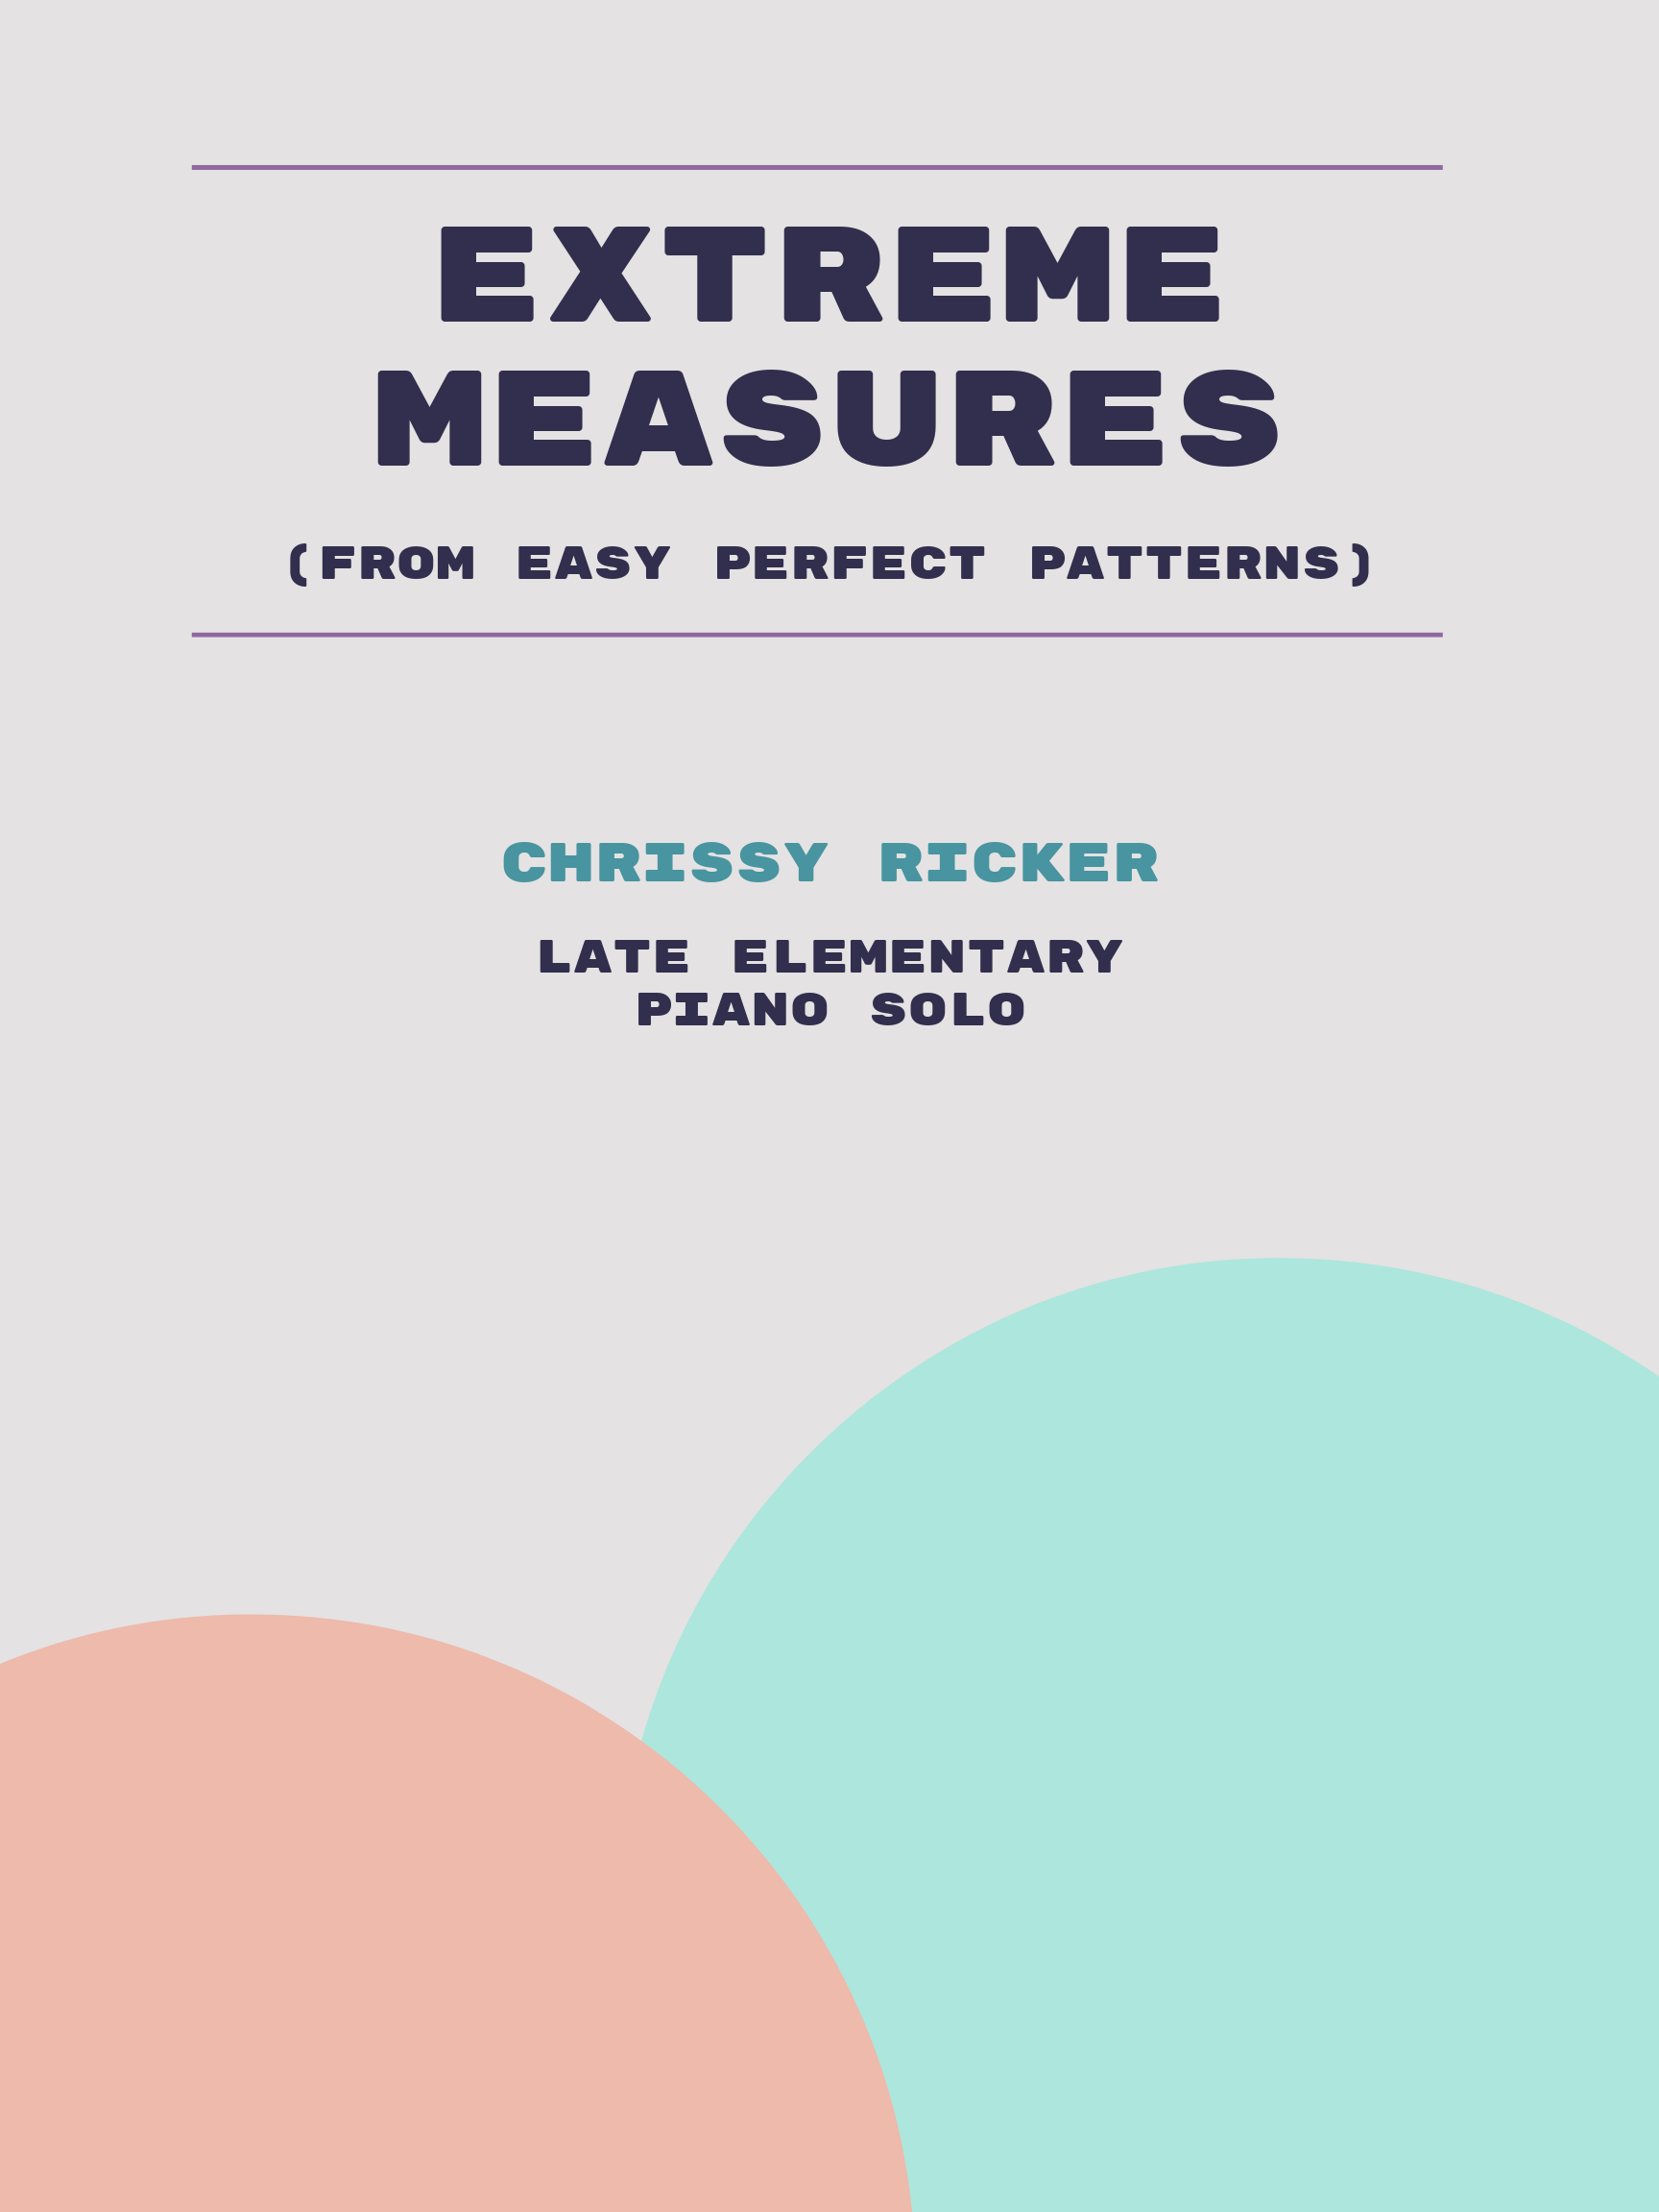 Extreme Measures by Chrissy Ricker